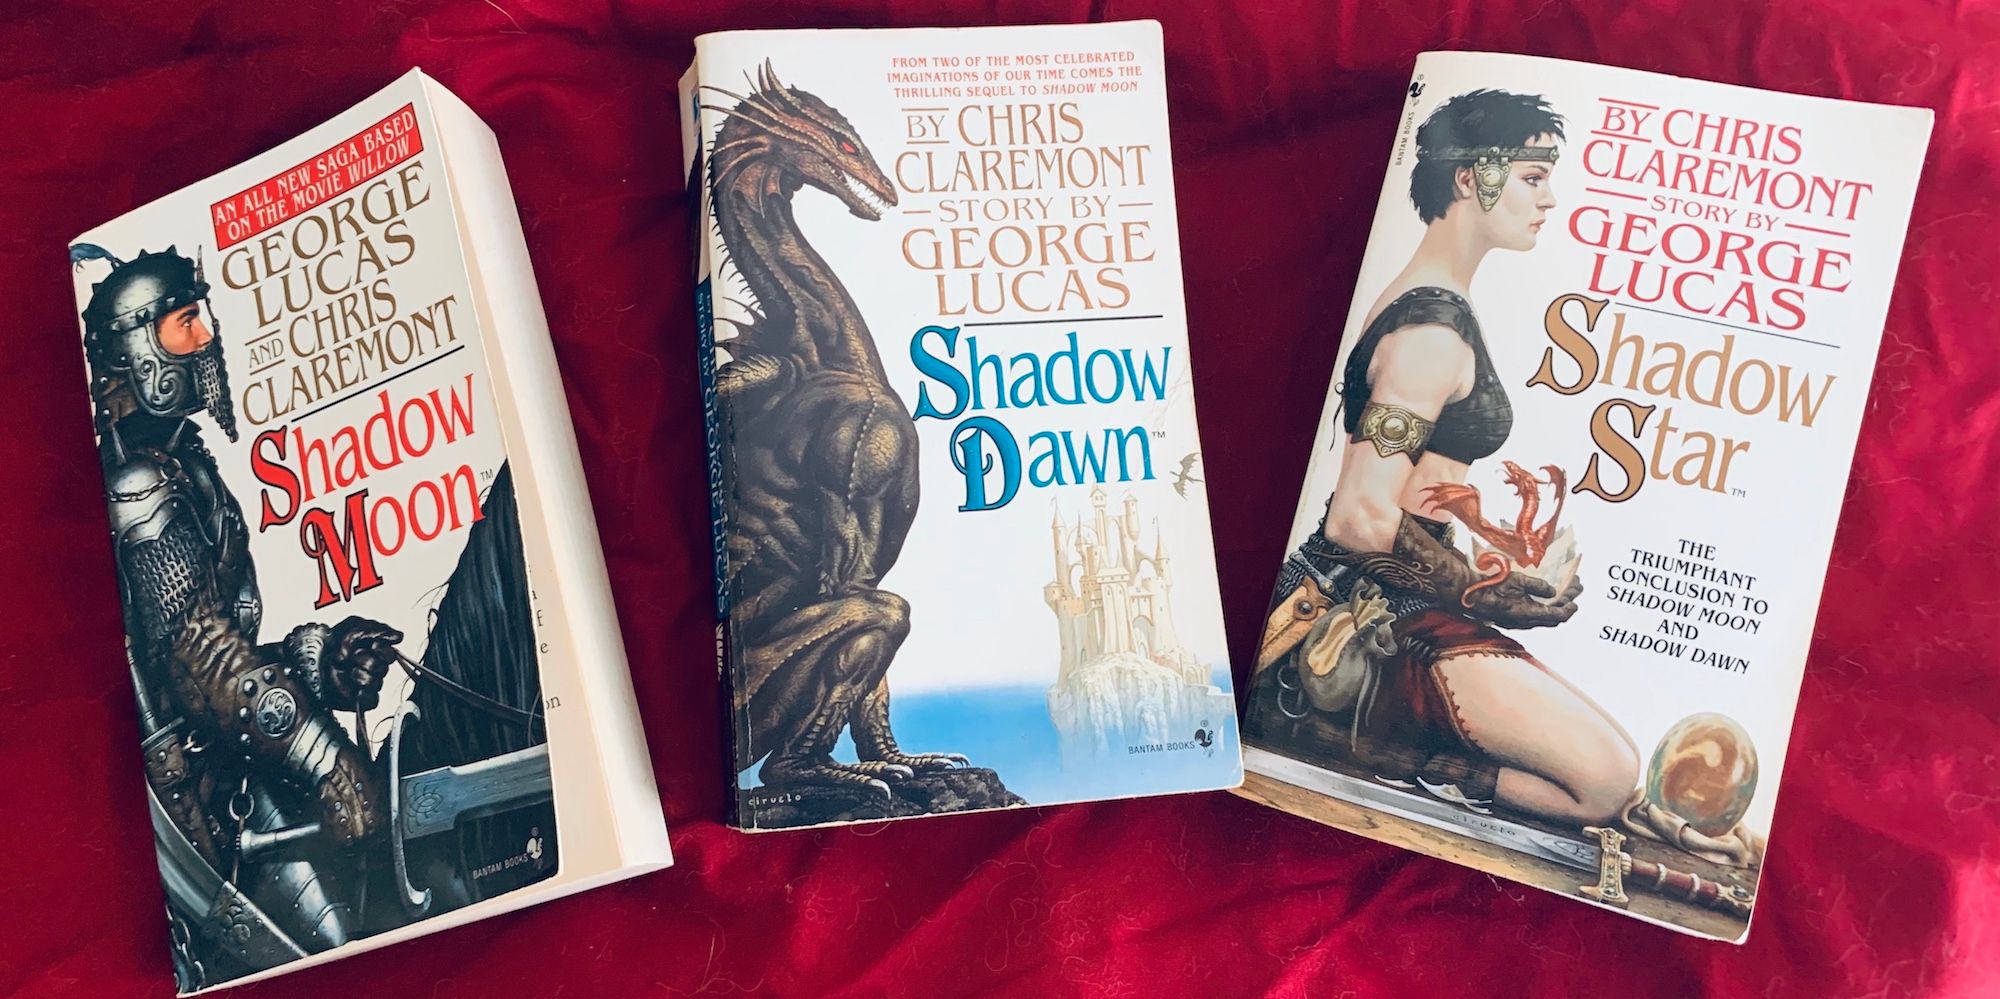 The Shadow War Chronicles cover set